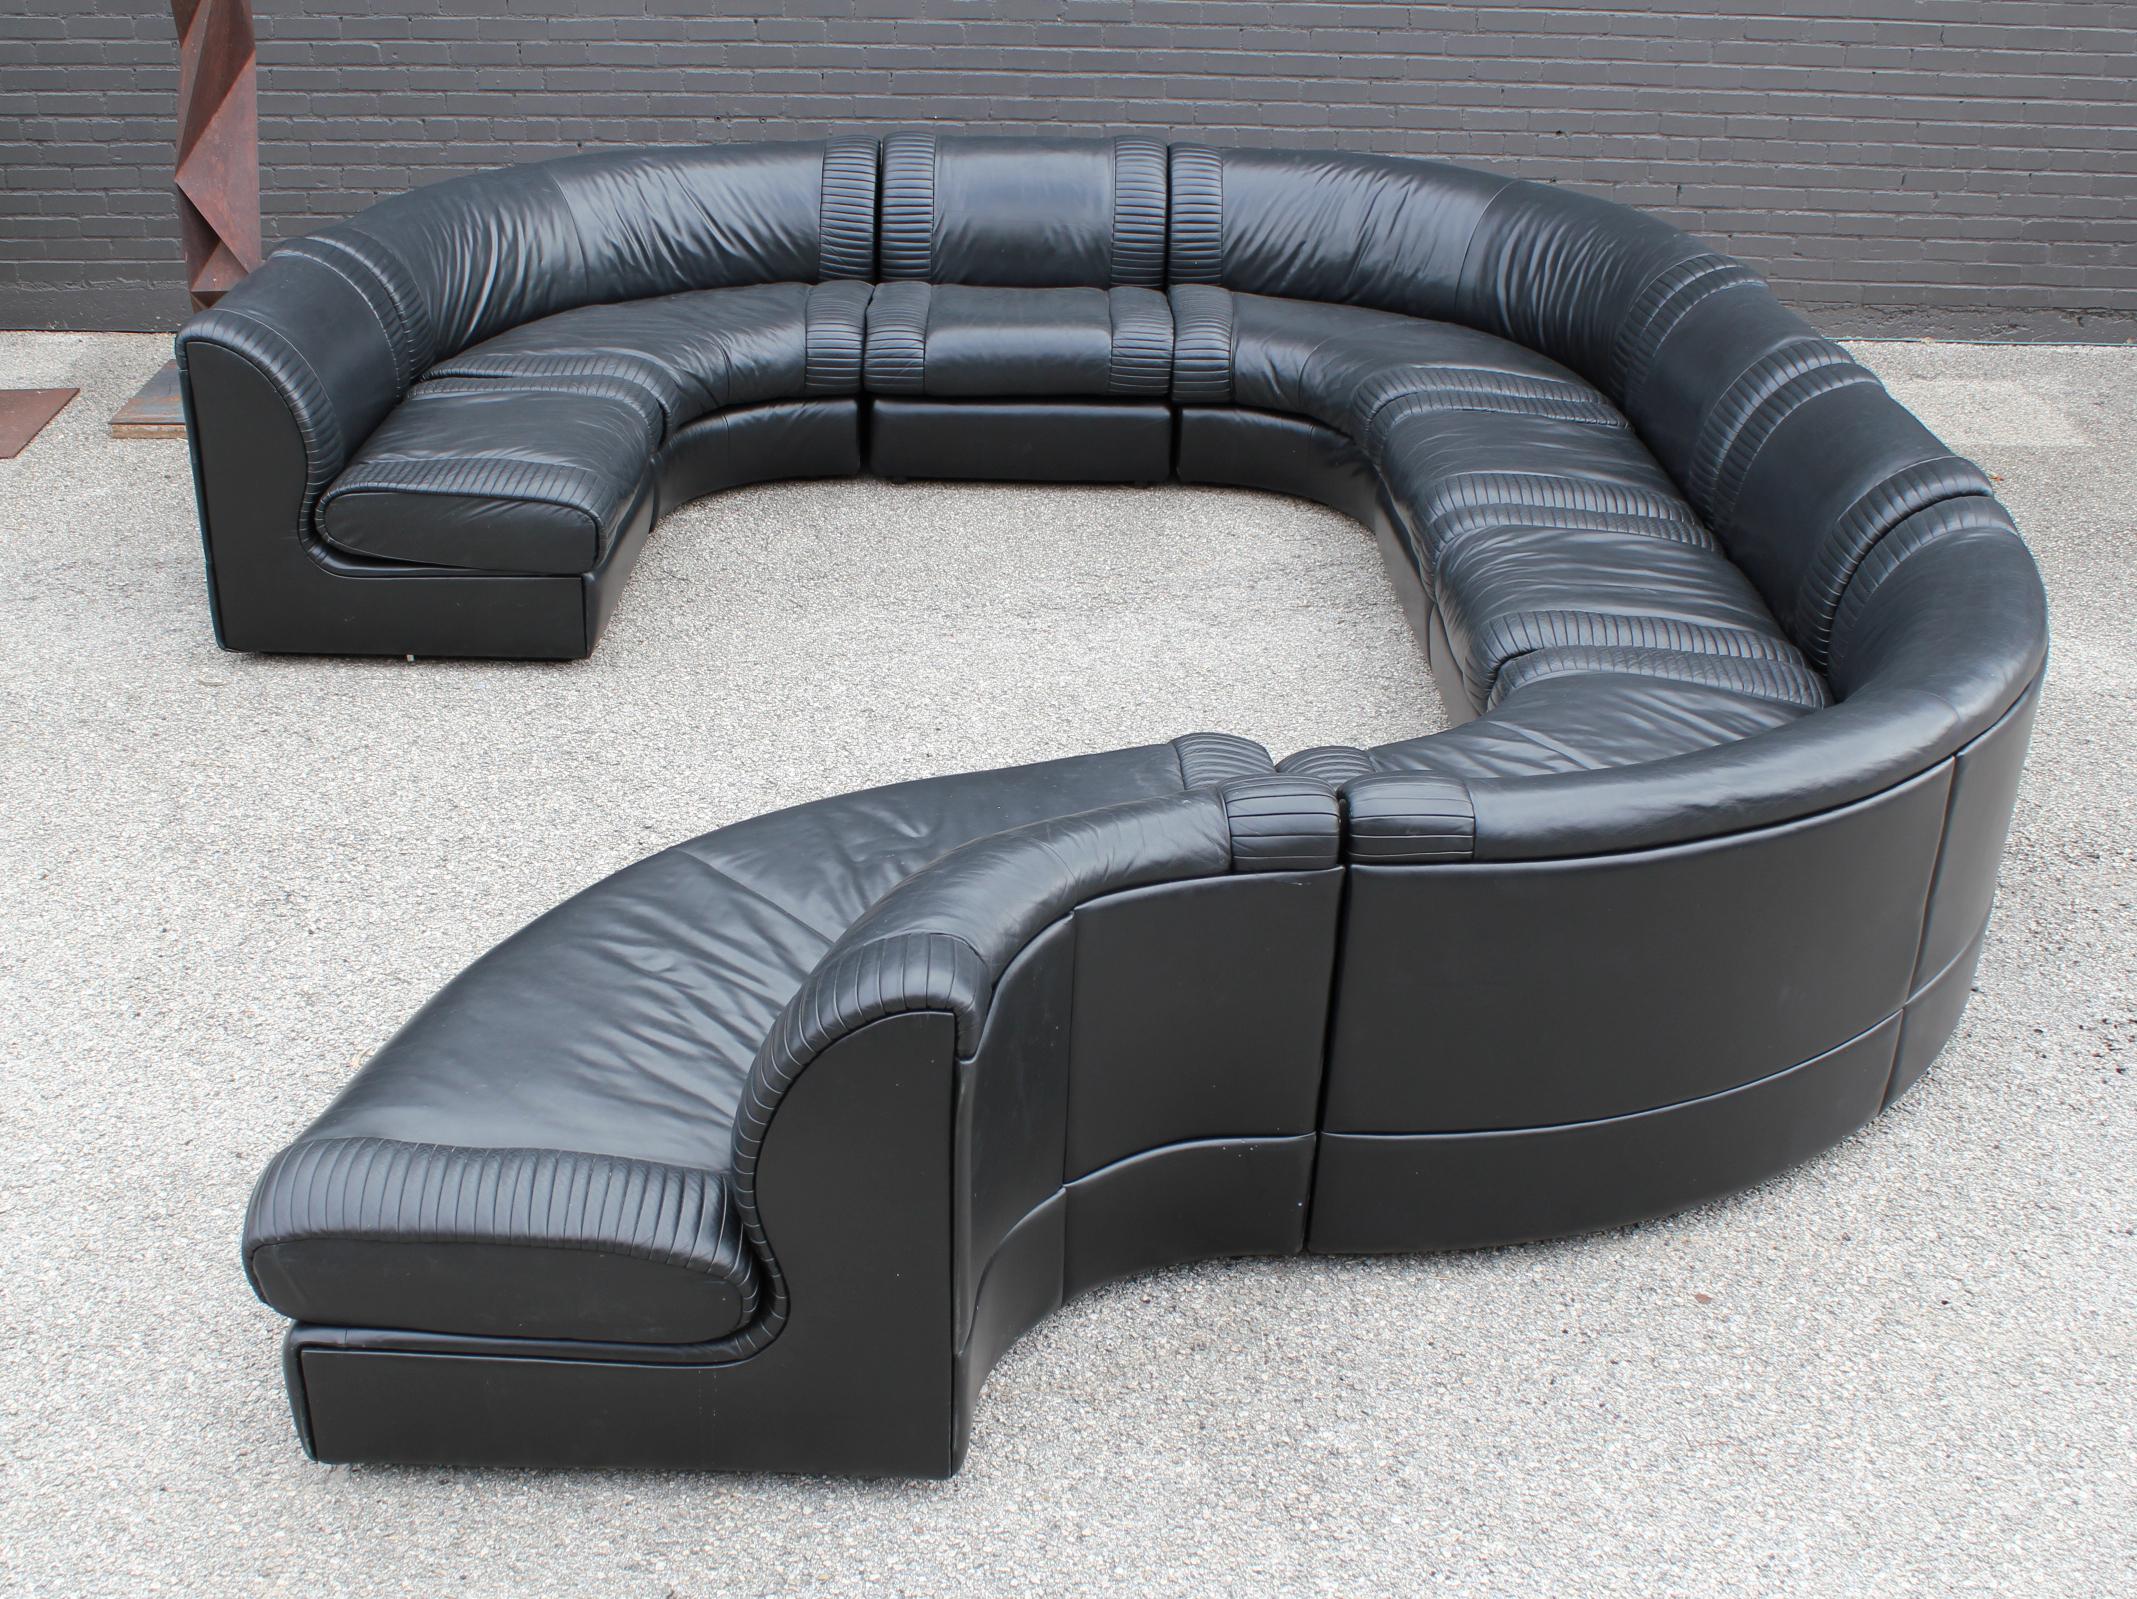 De Sede Sectional Sofa Black Leather 8 Modular Sections from Switzerland, 1970s 2